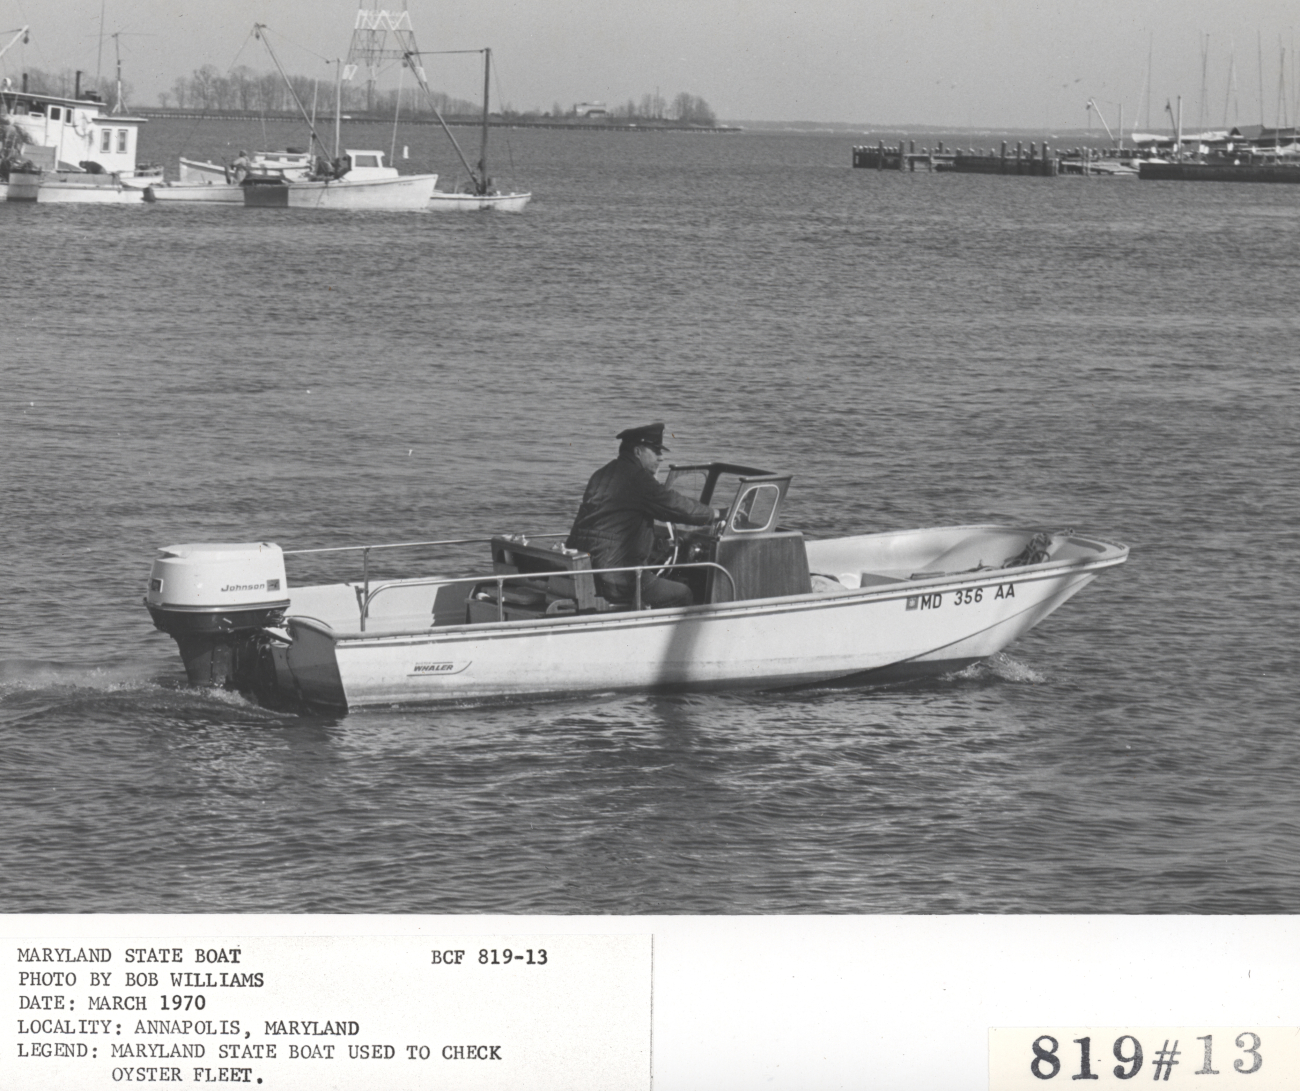 Maryland state patrol boat monitors oystering among other duties